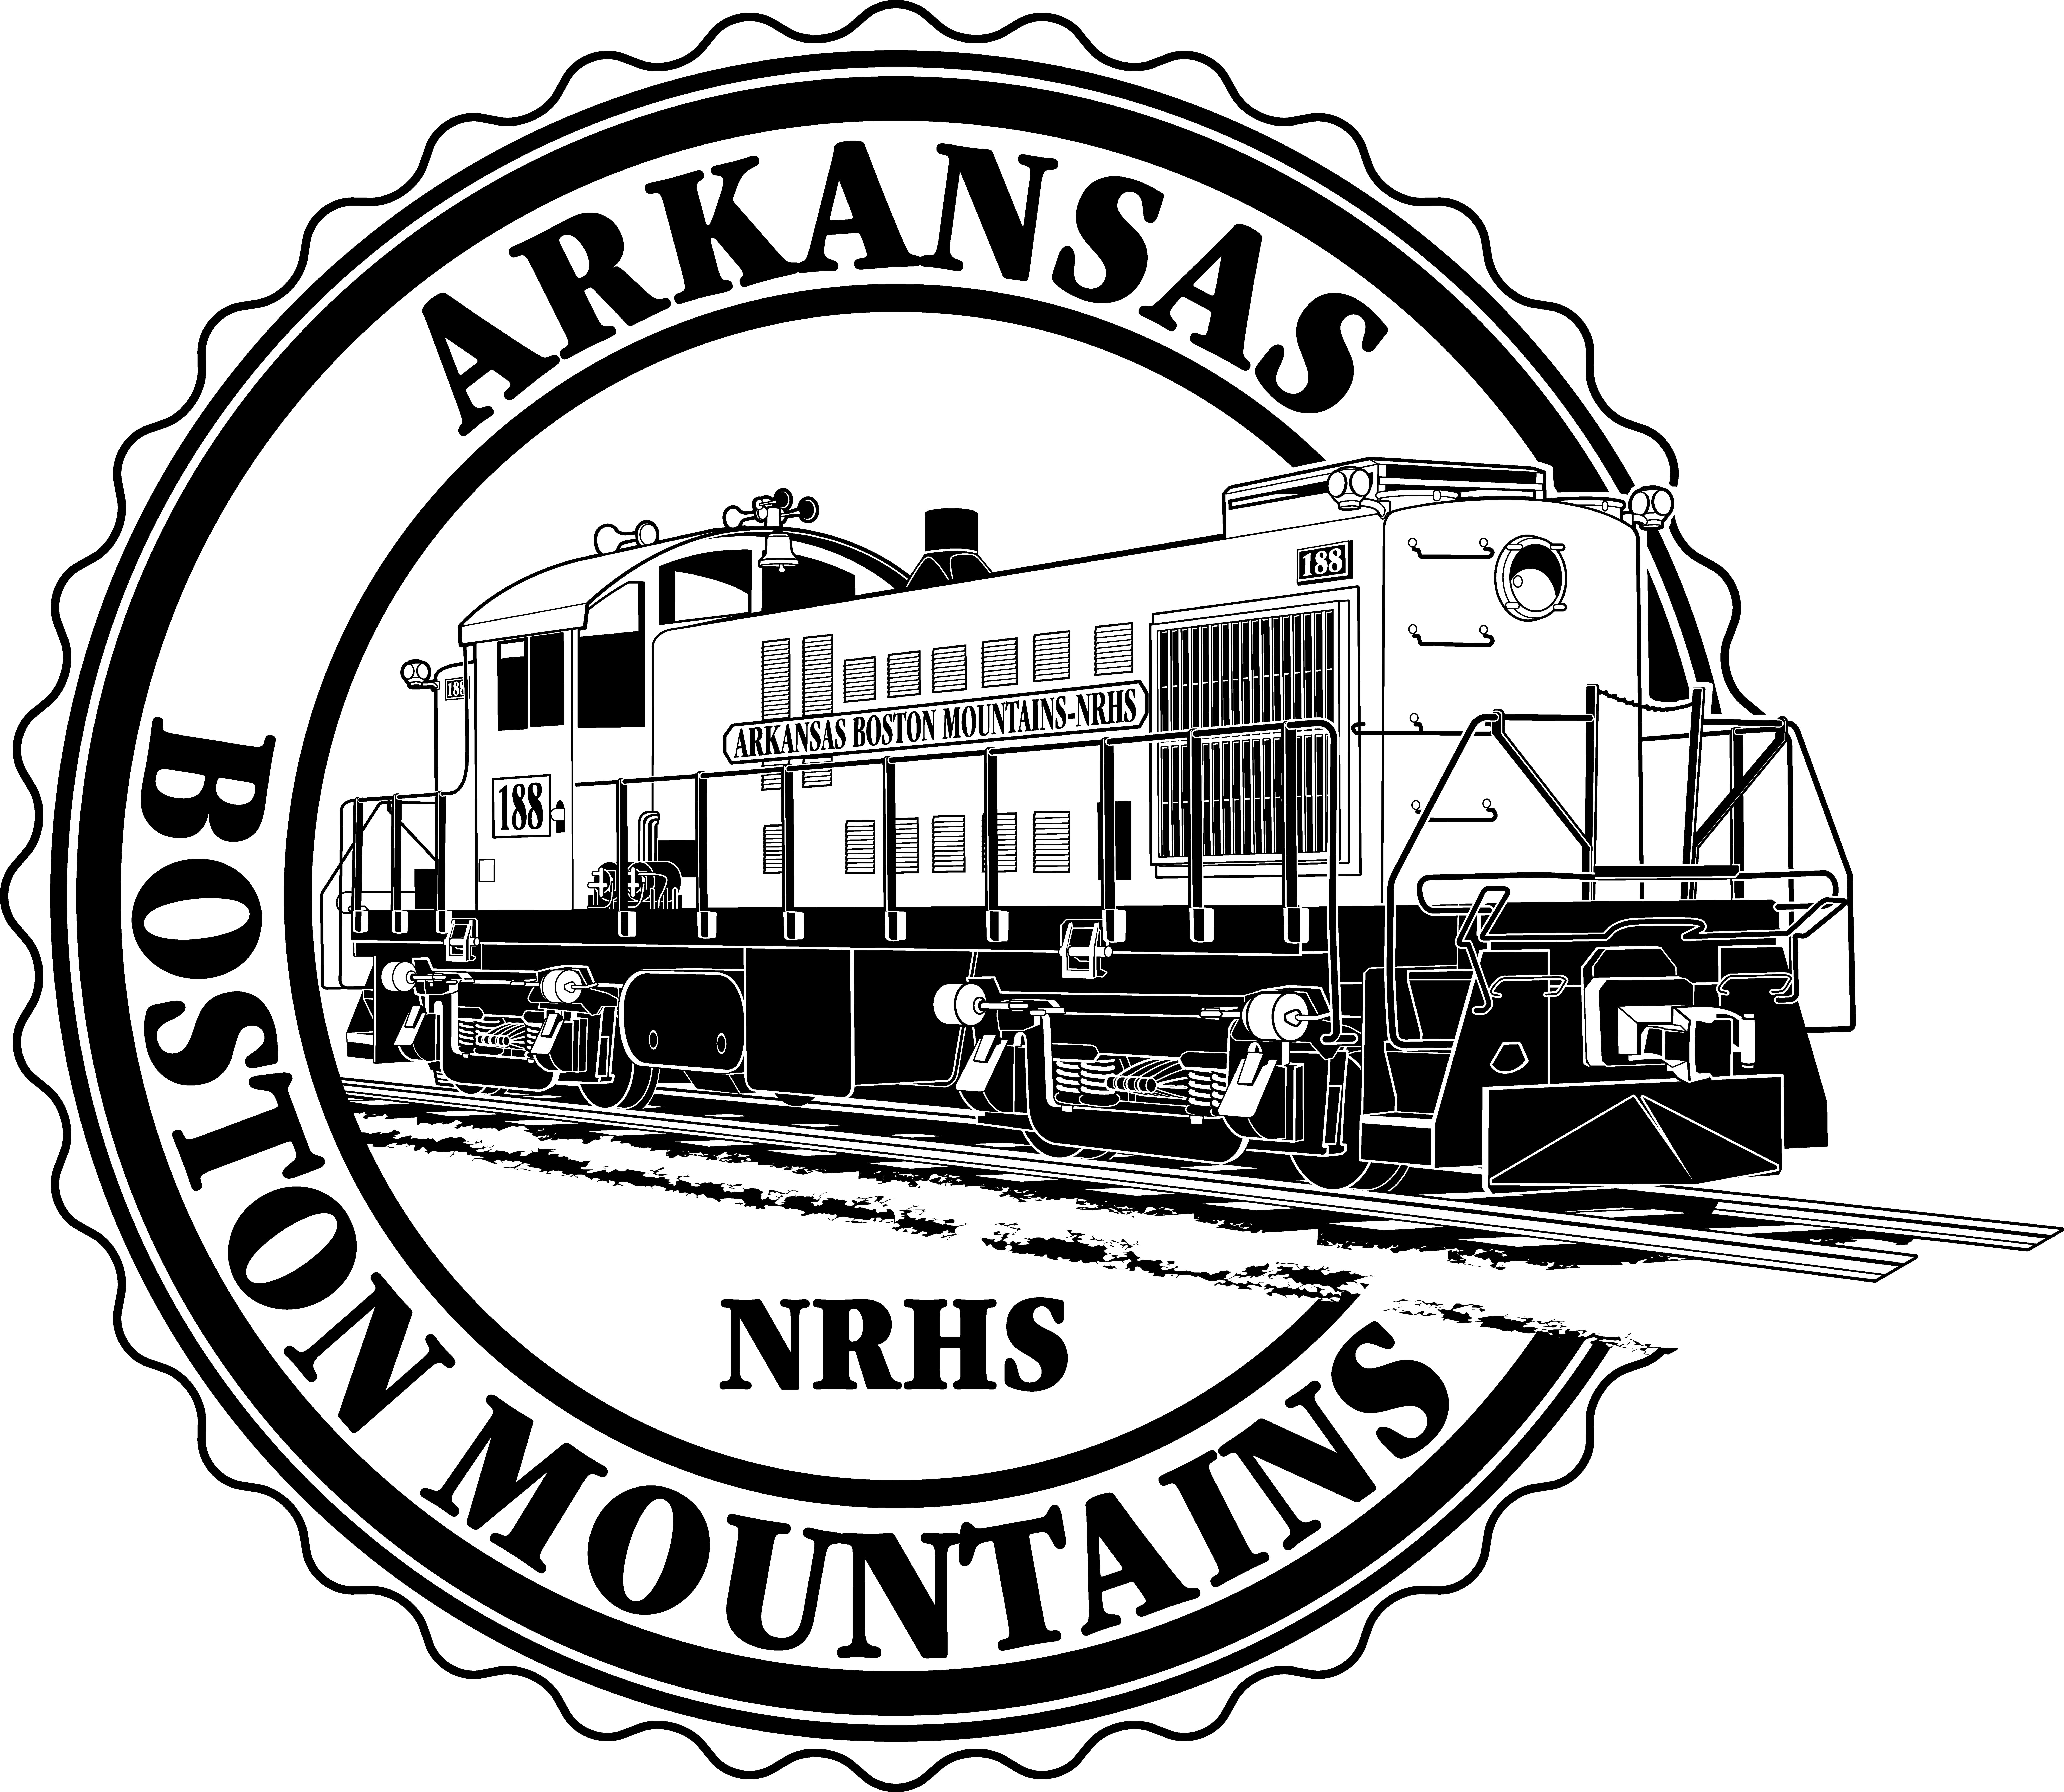 Arkansas Boston Mountains Chapter of the NRHS